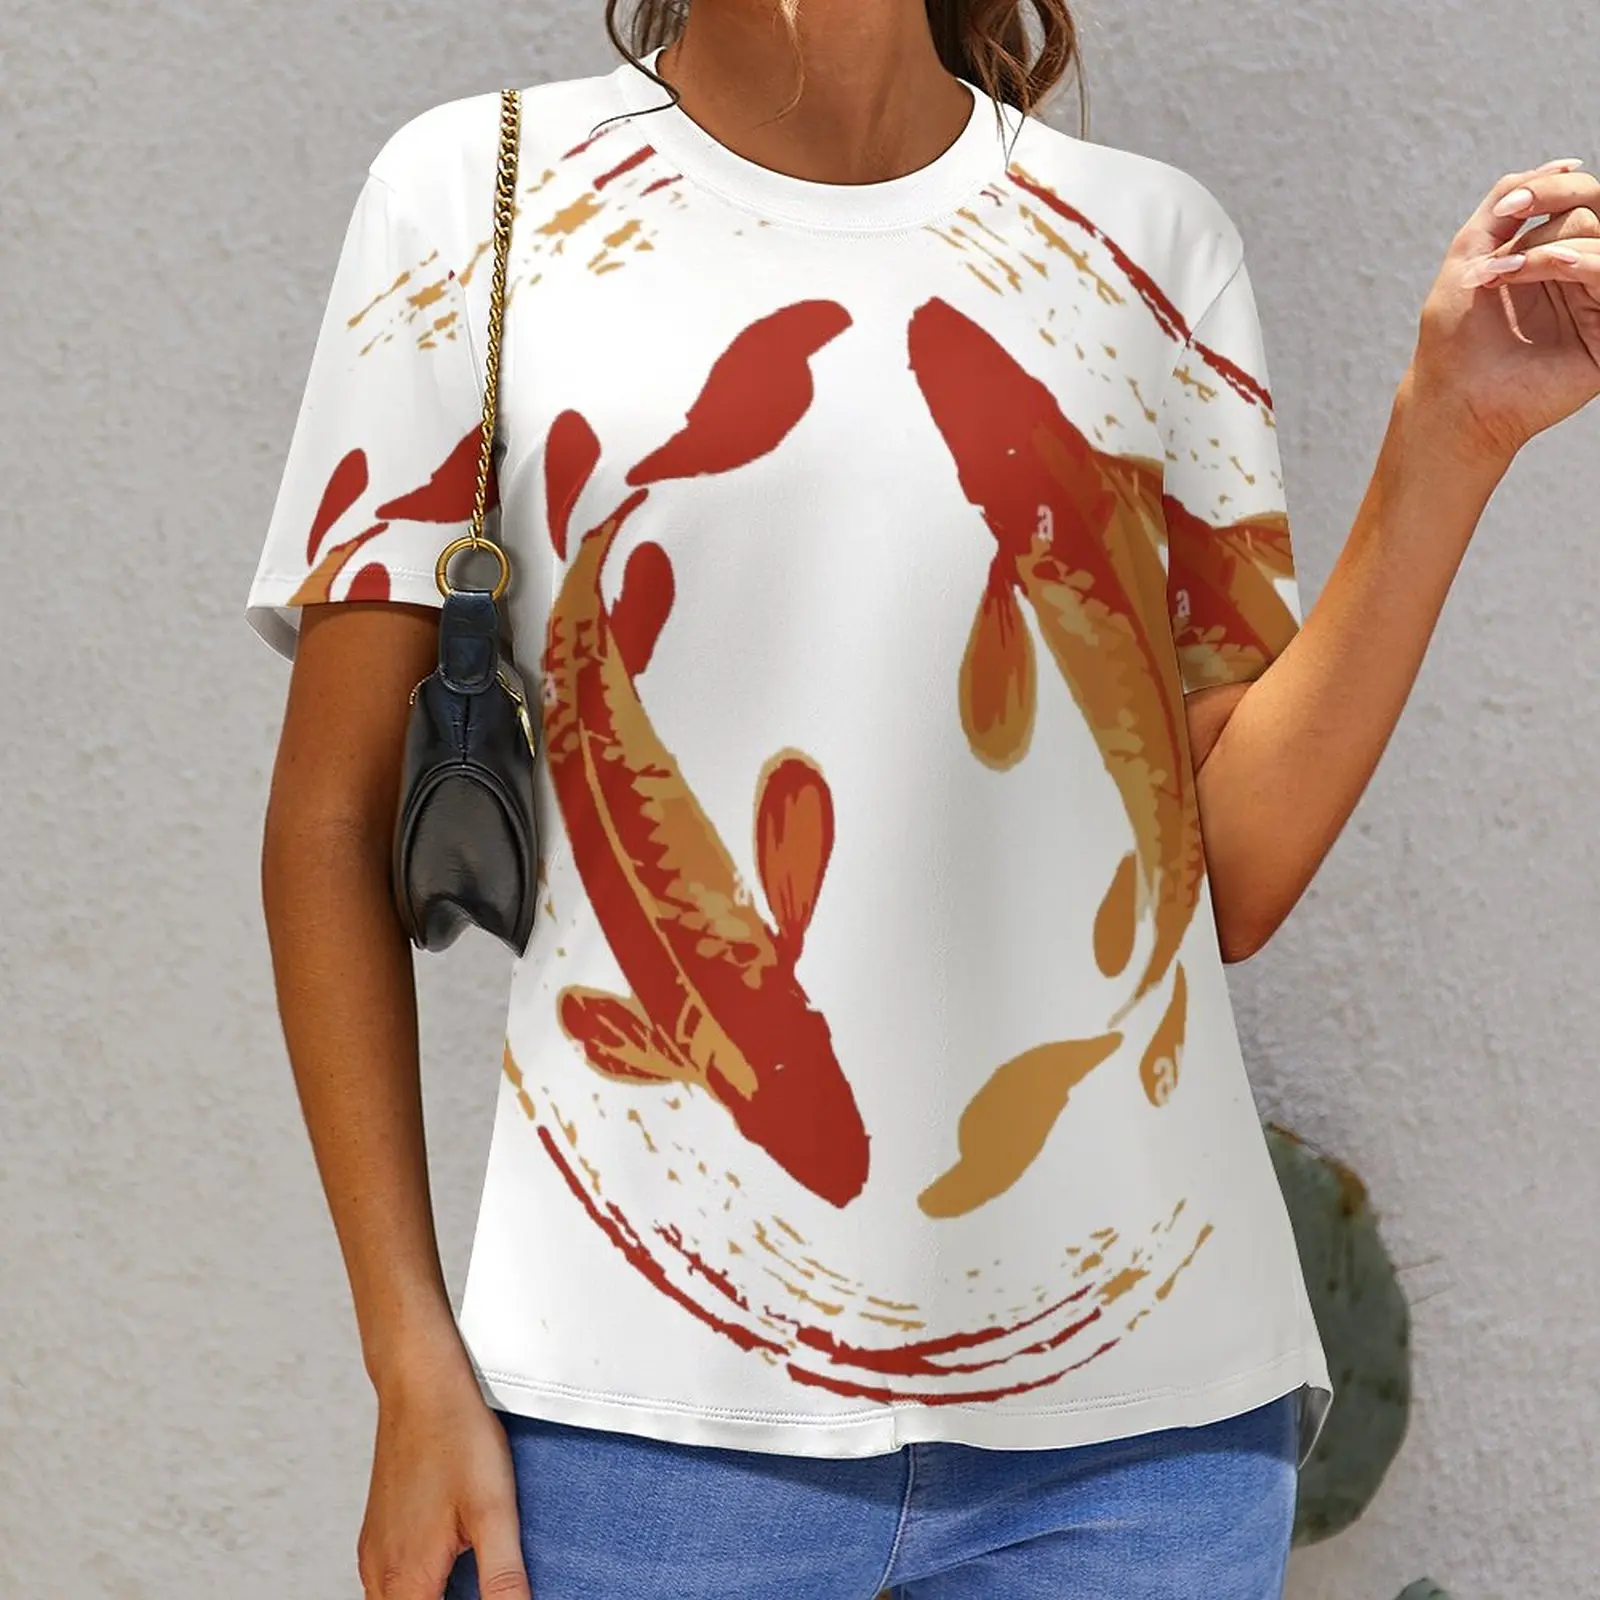 

Tshirt Couple-of-koi-fish-in-japan-or-china-art-style-for-luck-prosperity-and-good-fortune-2A7B8AT Classic Home USA Size High